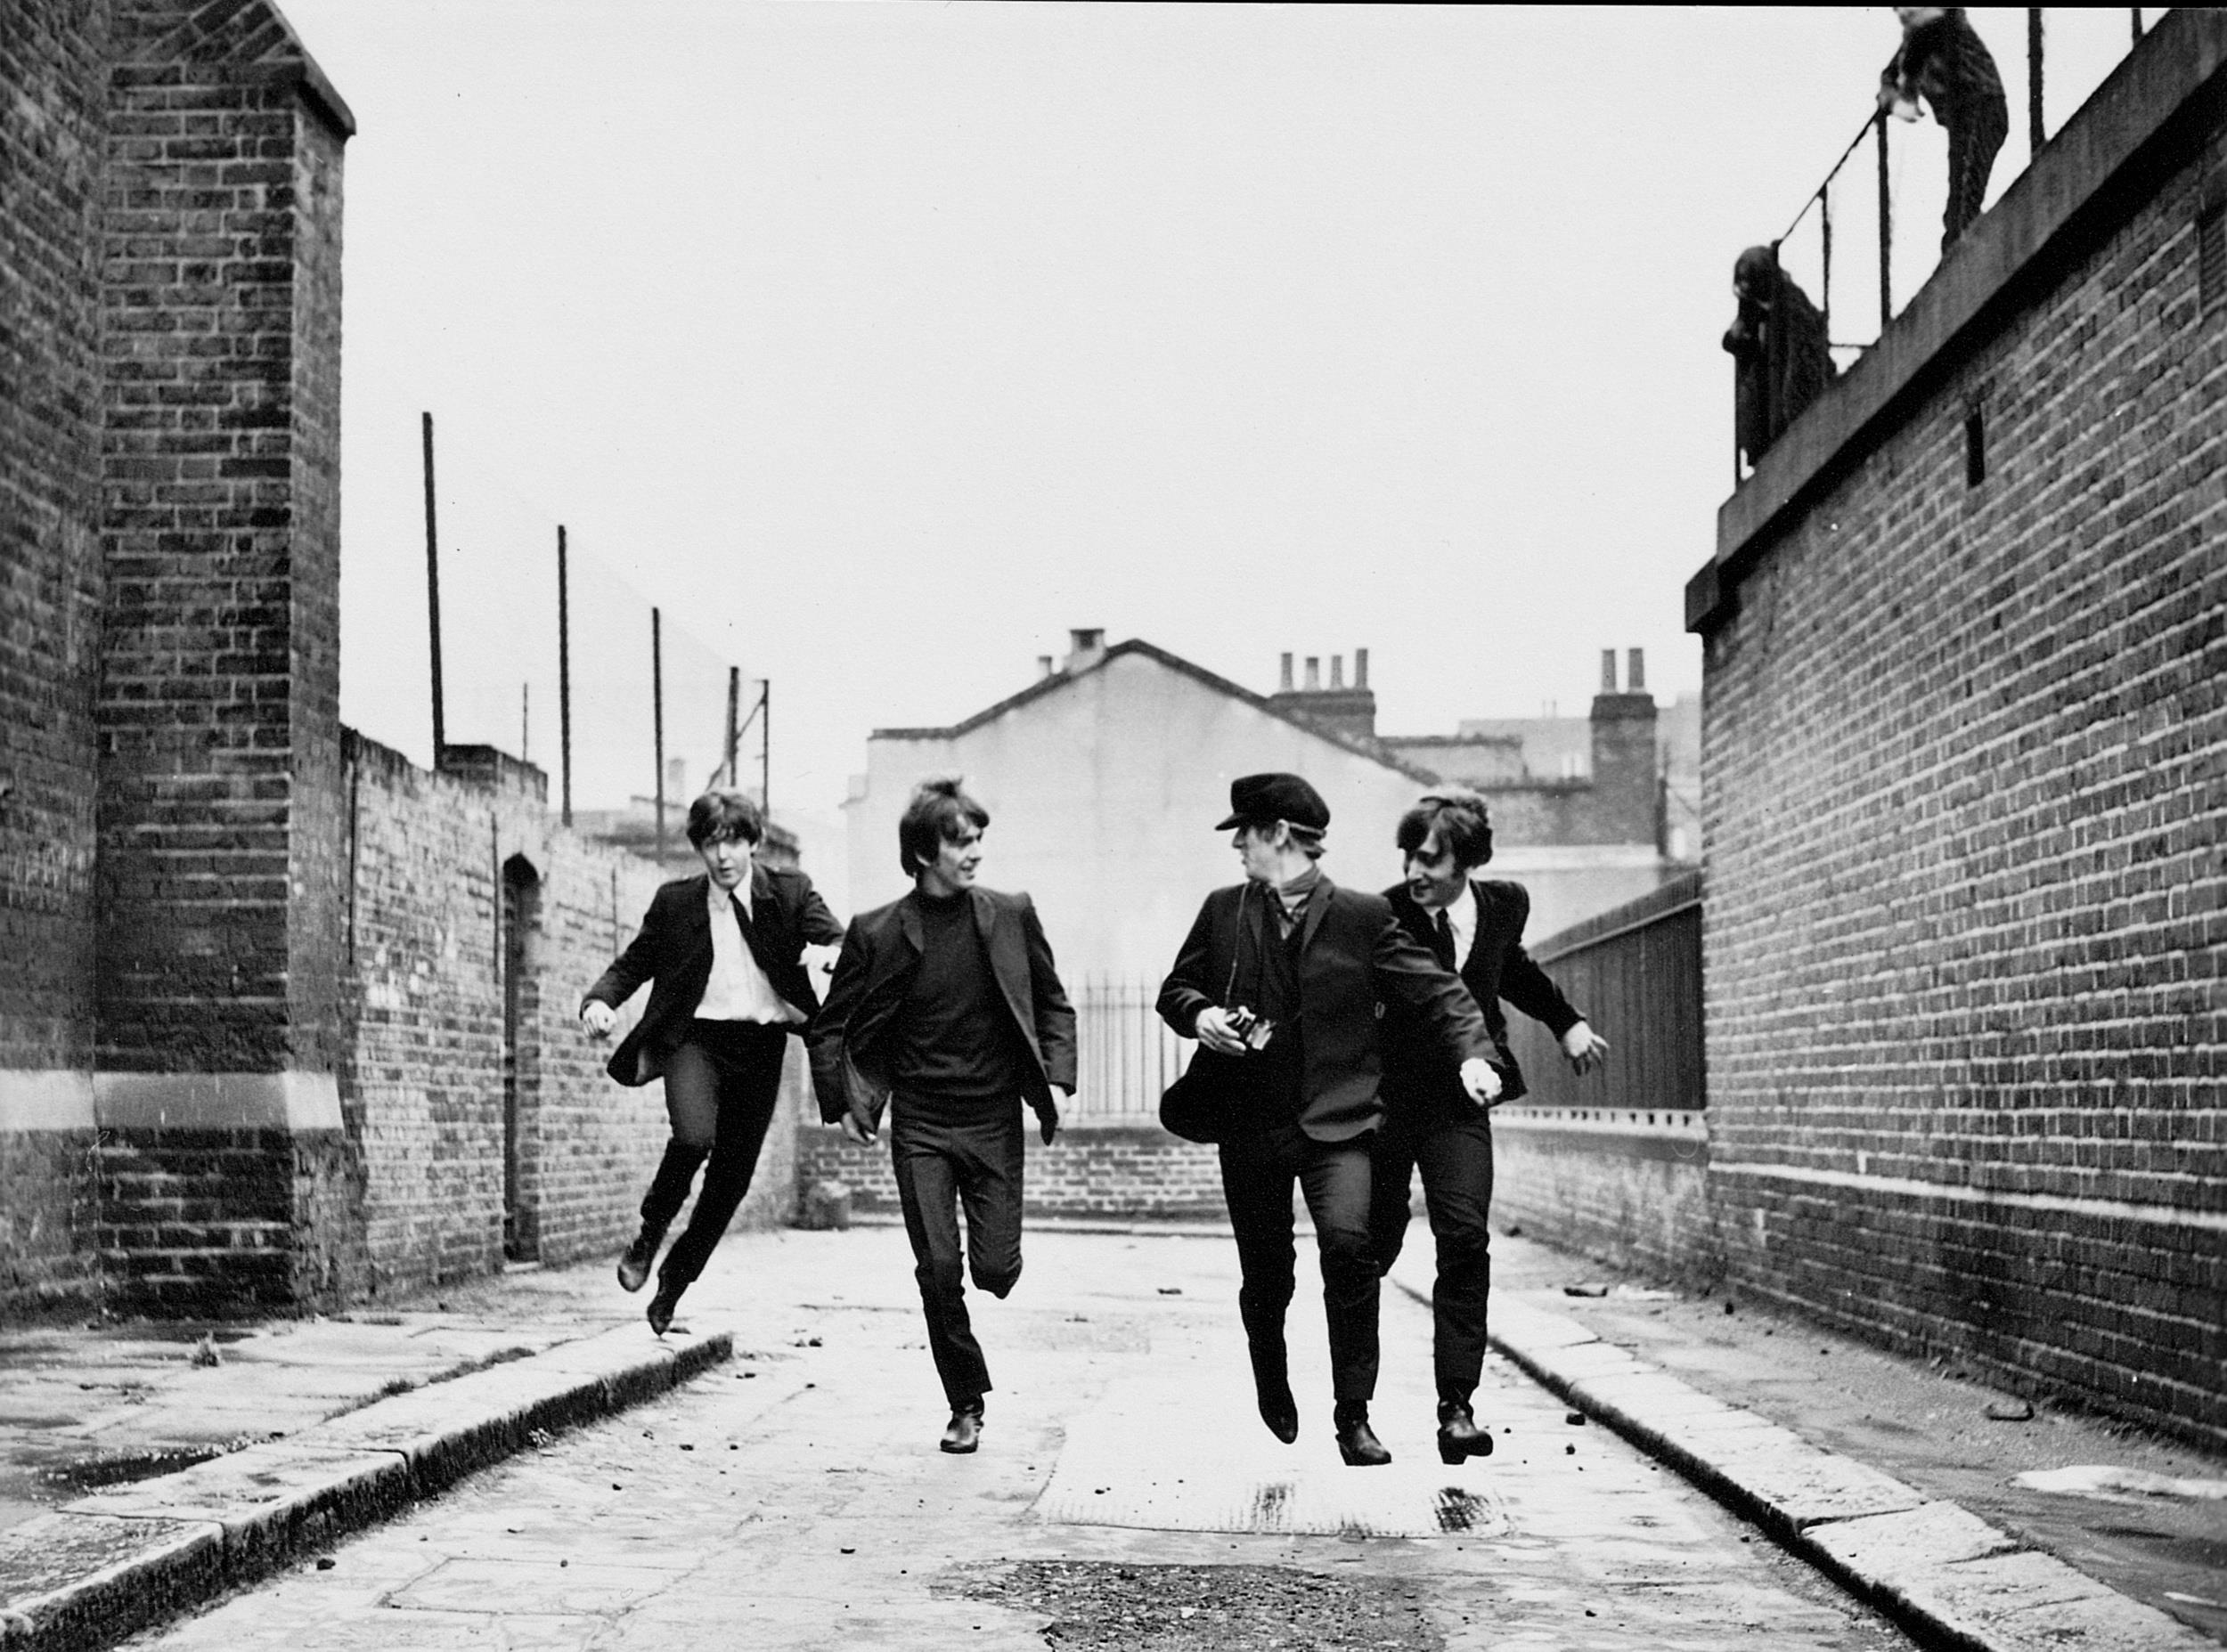 <p>The Beatles are memorably from Liverpool. They didn’t stay in that city forever, though. <em>A Hard Day’s Night</em> takes place at the peak of the Fab Four’s fame and sees the band traveling to London to perform. It’s a romp of a comedy, and of course, it has a killer soundtrack.</p><p><a href='https://www.msn.com/en-us/community/channel/vid-cj9pqbr0vn9in2b6ddcd8sfgpfq6x6utp44fssrv6mc2gtybw0us'>Follow us on MSN to see more of our exclusive entertainment content.</a></p>